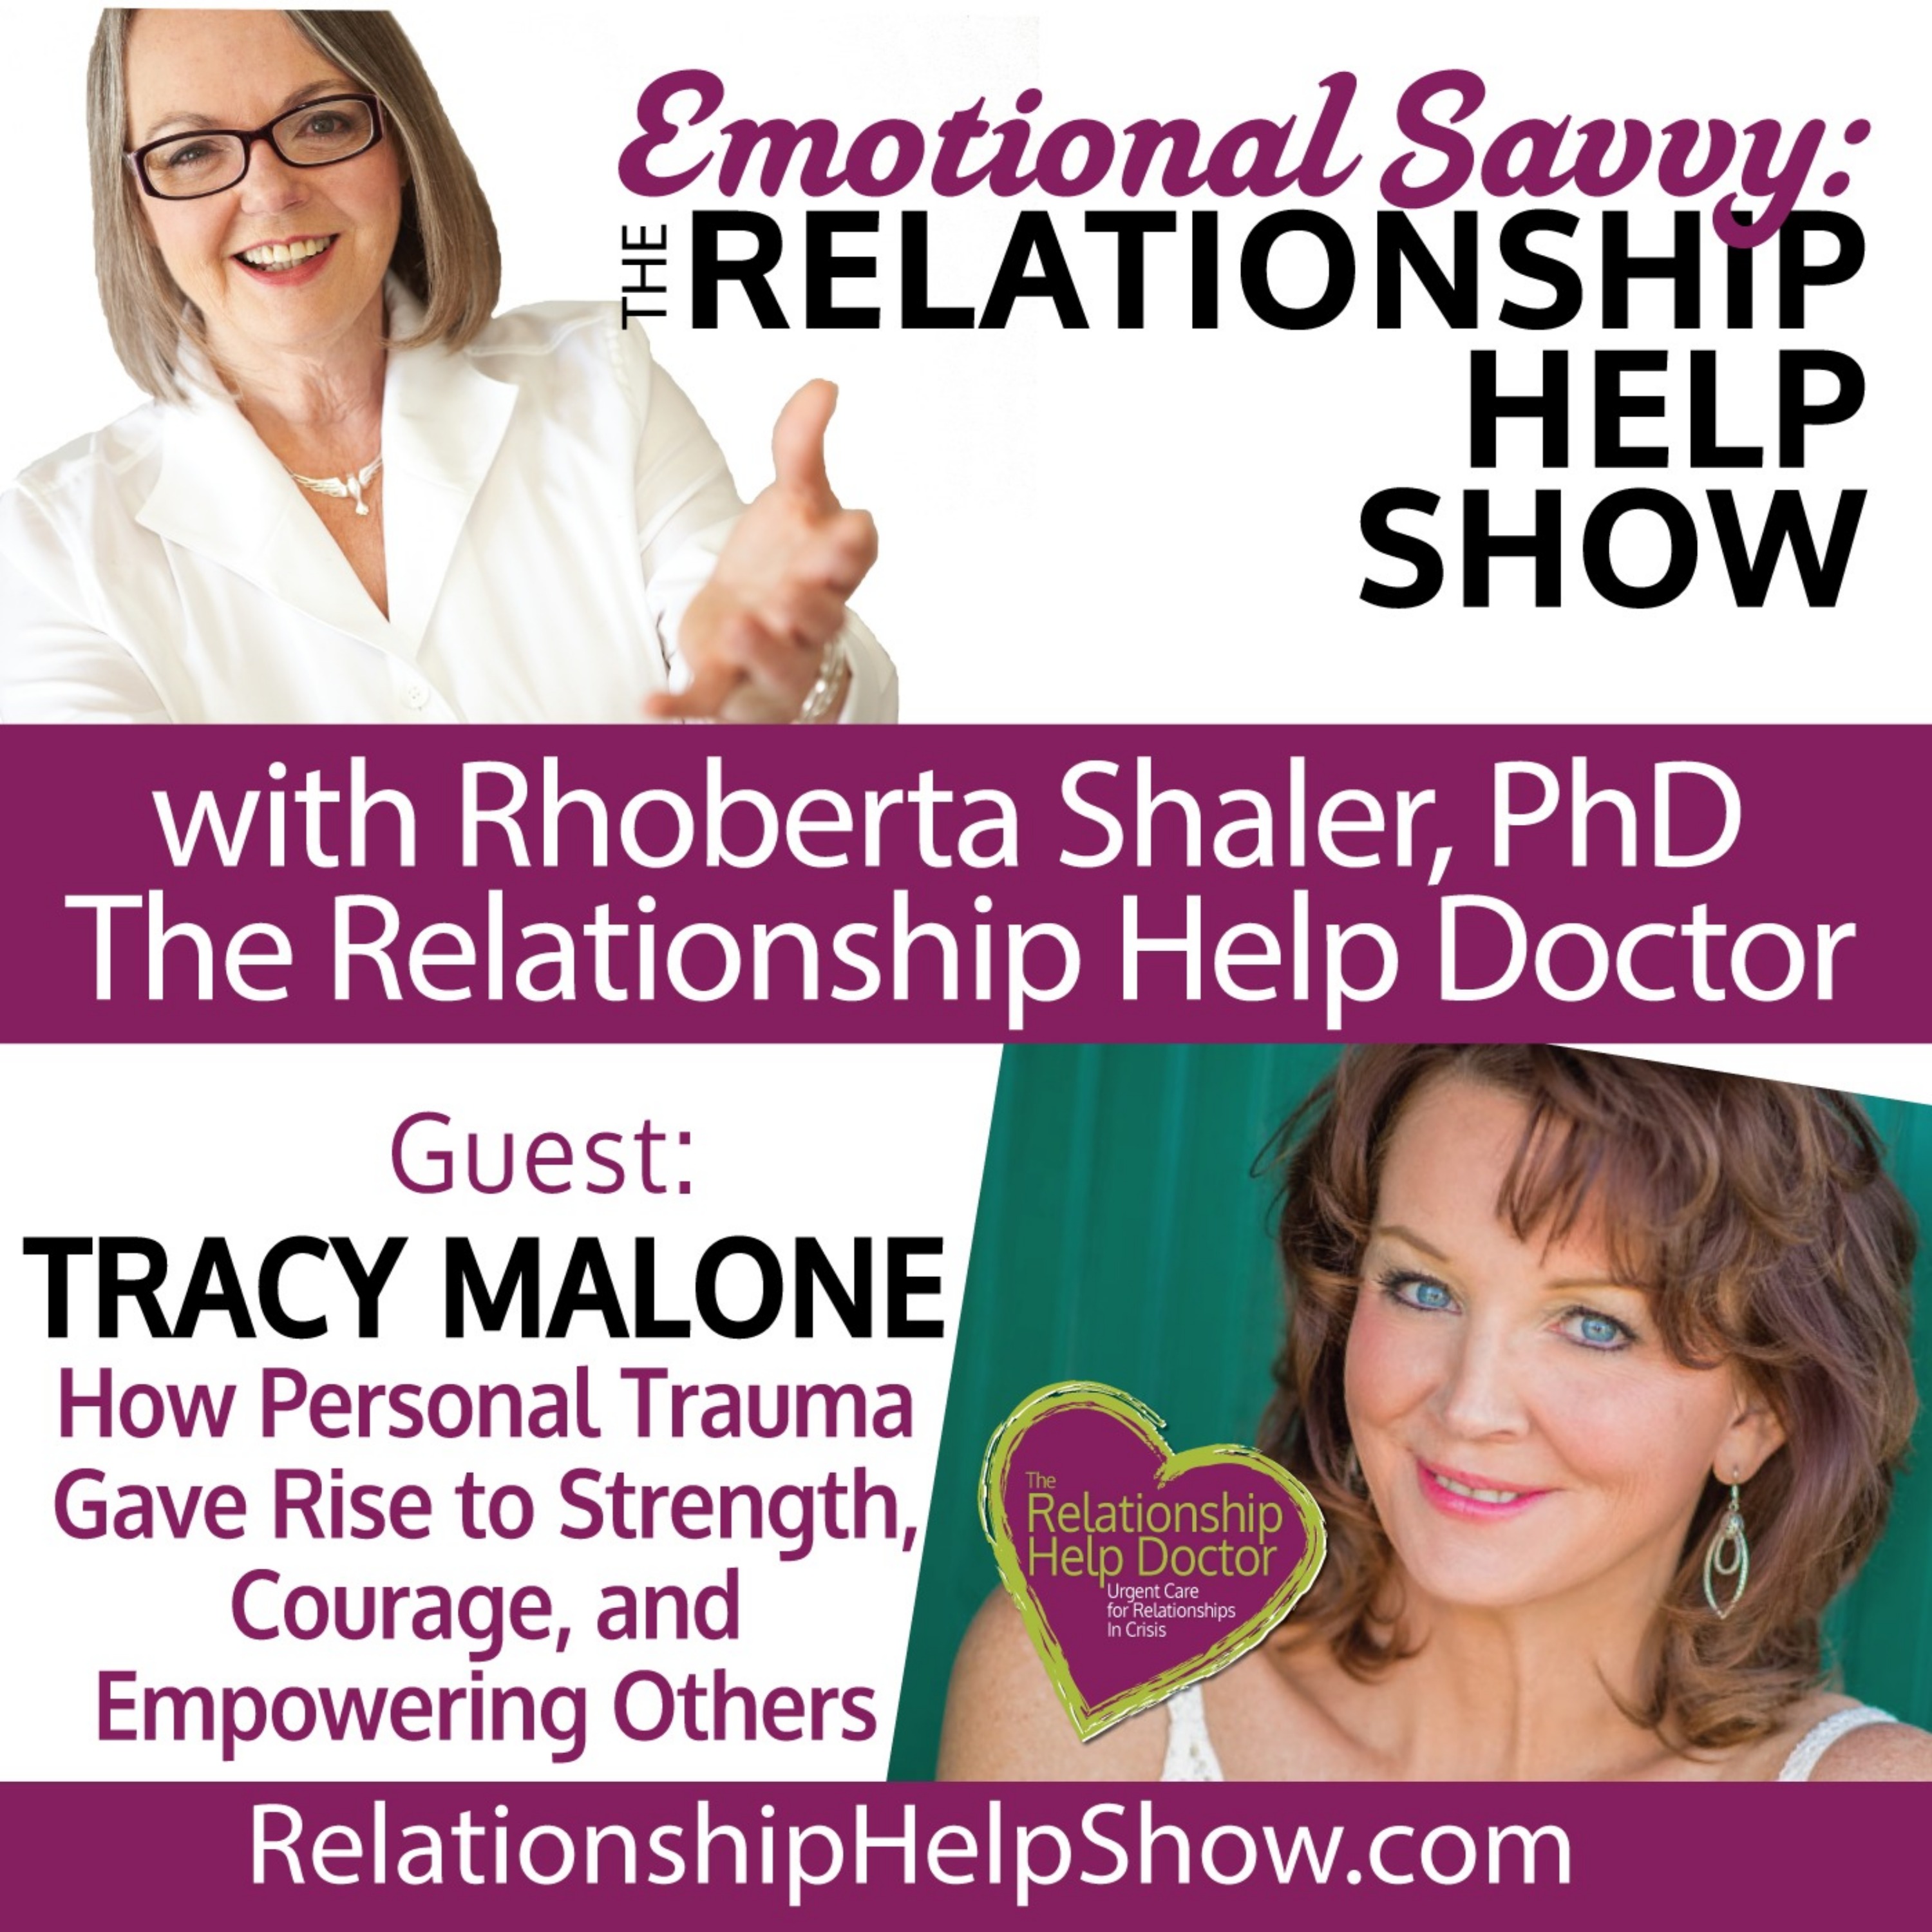 How Personal Trauma Gave Rise to Strength, Courage, and Empowering Others  GUEST: Tracy Malone